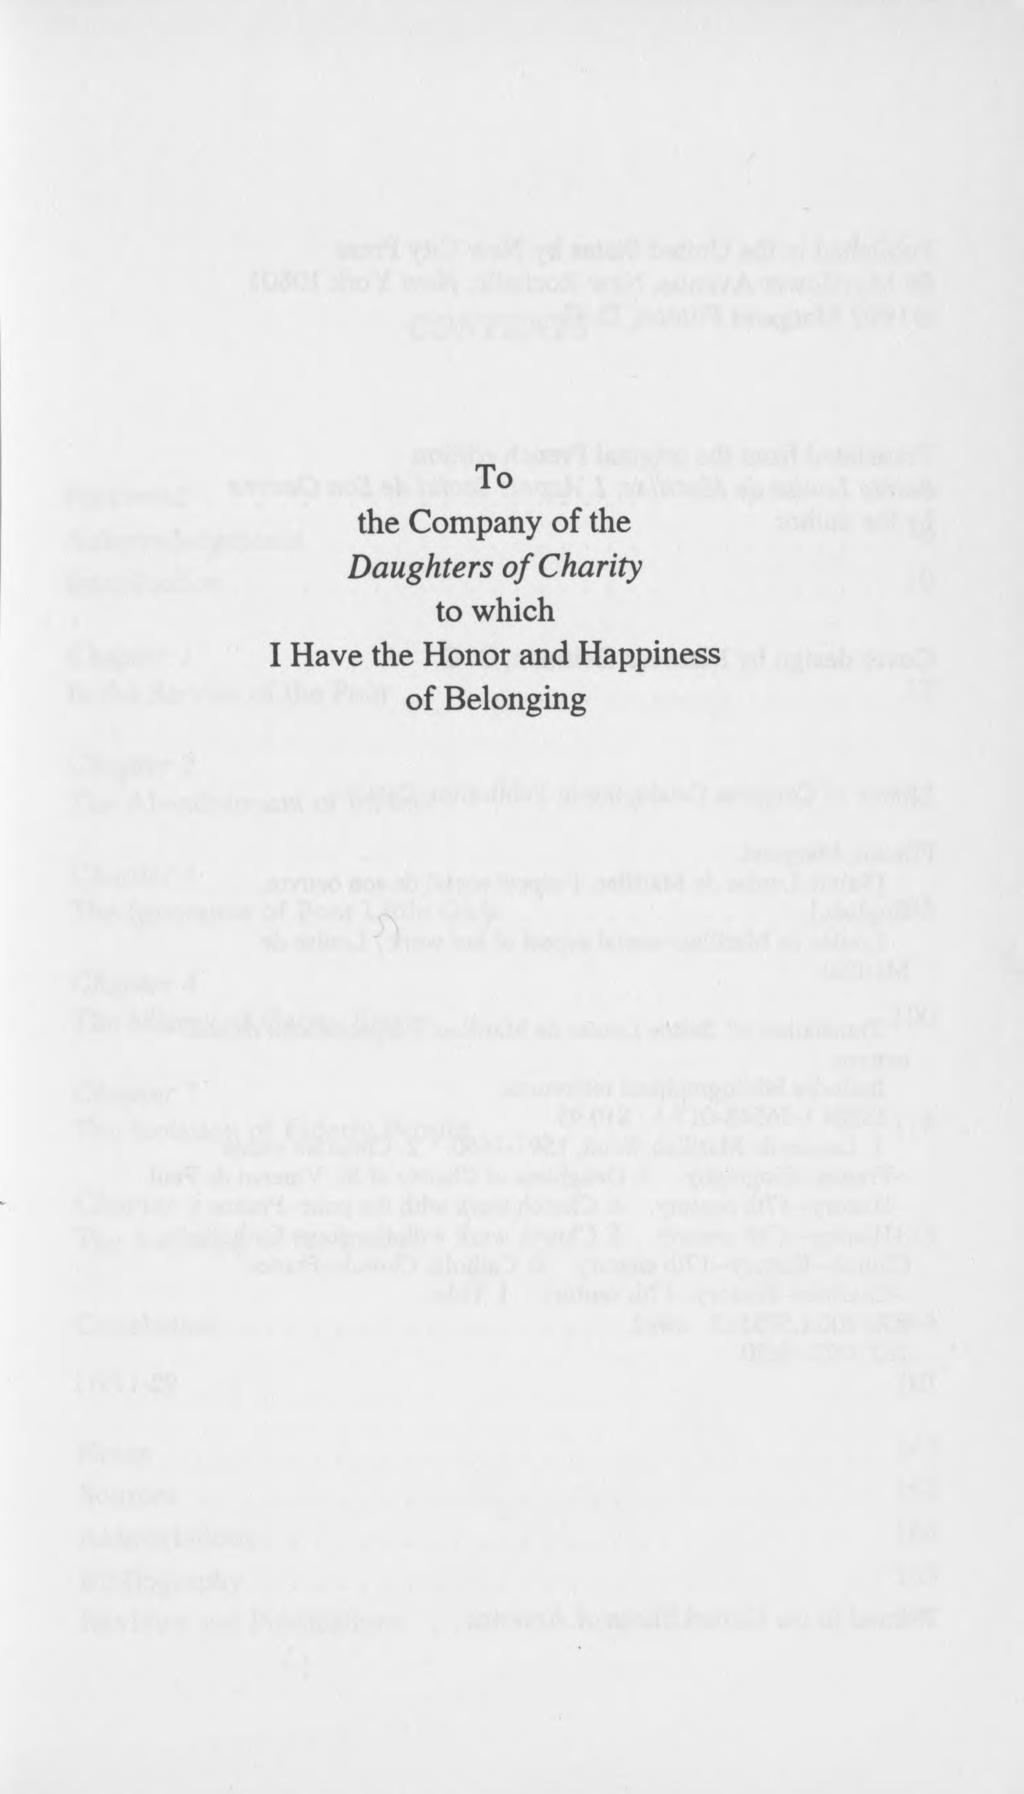 the Company of the Daughters of Charity to